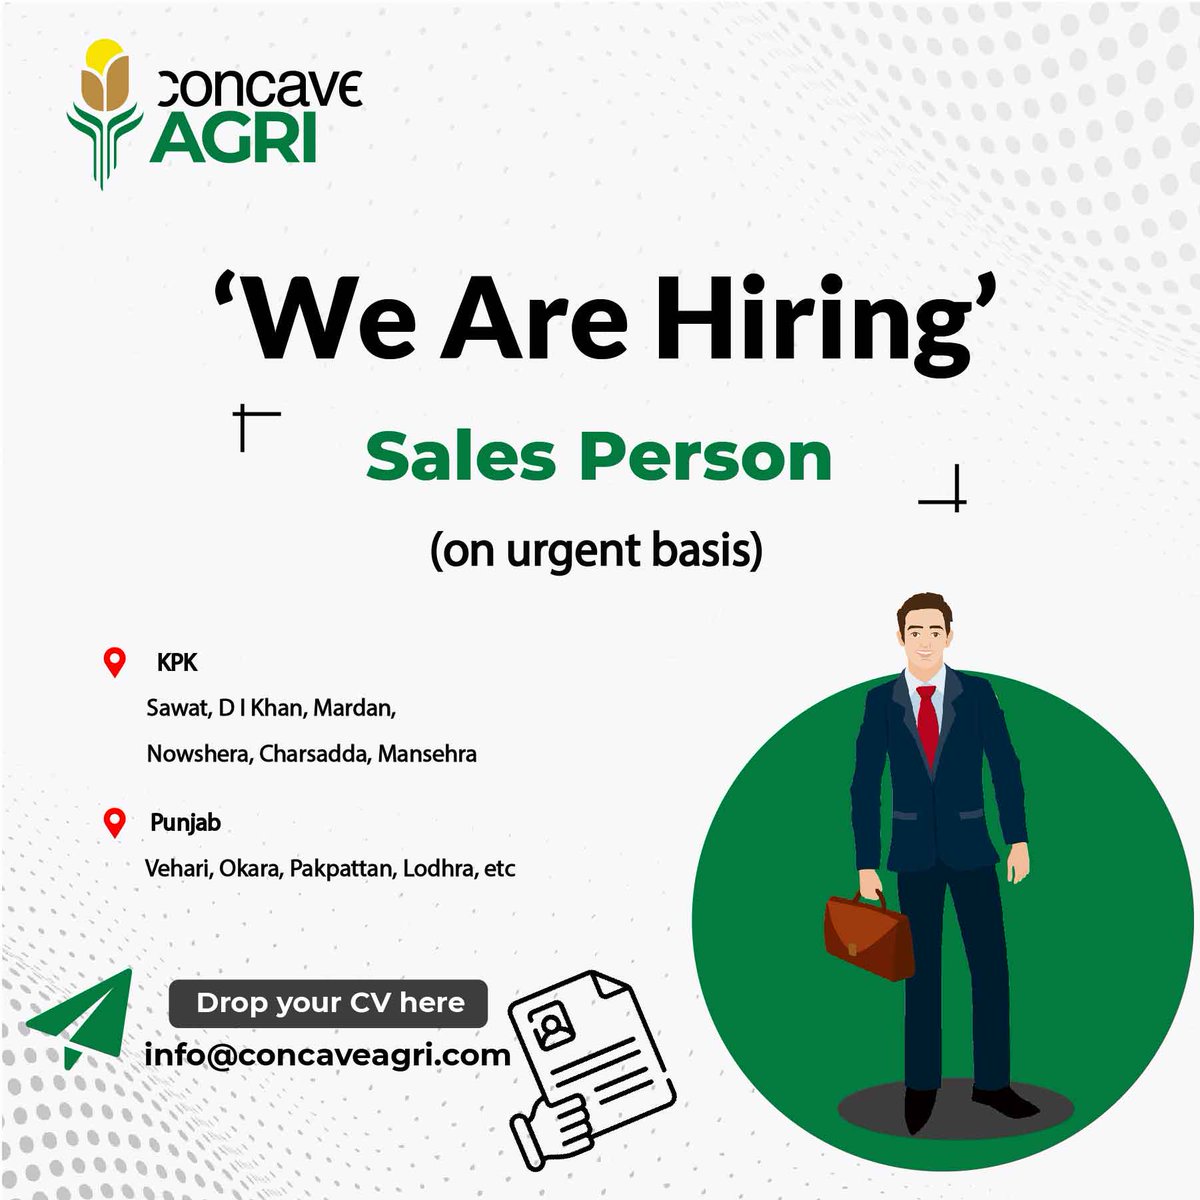 Concave AGRI is looking to hire a Sales Person with experience in direct & channel sales as well as dealers and distributors.

For more information visit:

concaveagri.com

#ConcaveAGRI #jobseekers#jobopportunity #hiring #jobpost #AgricultureJobs #agrijobs #PakistanJobs